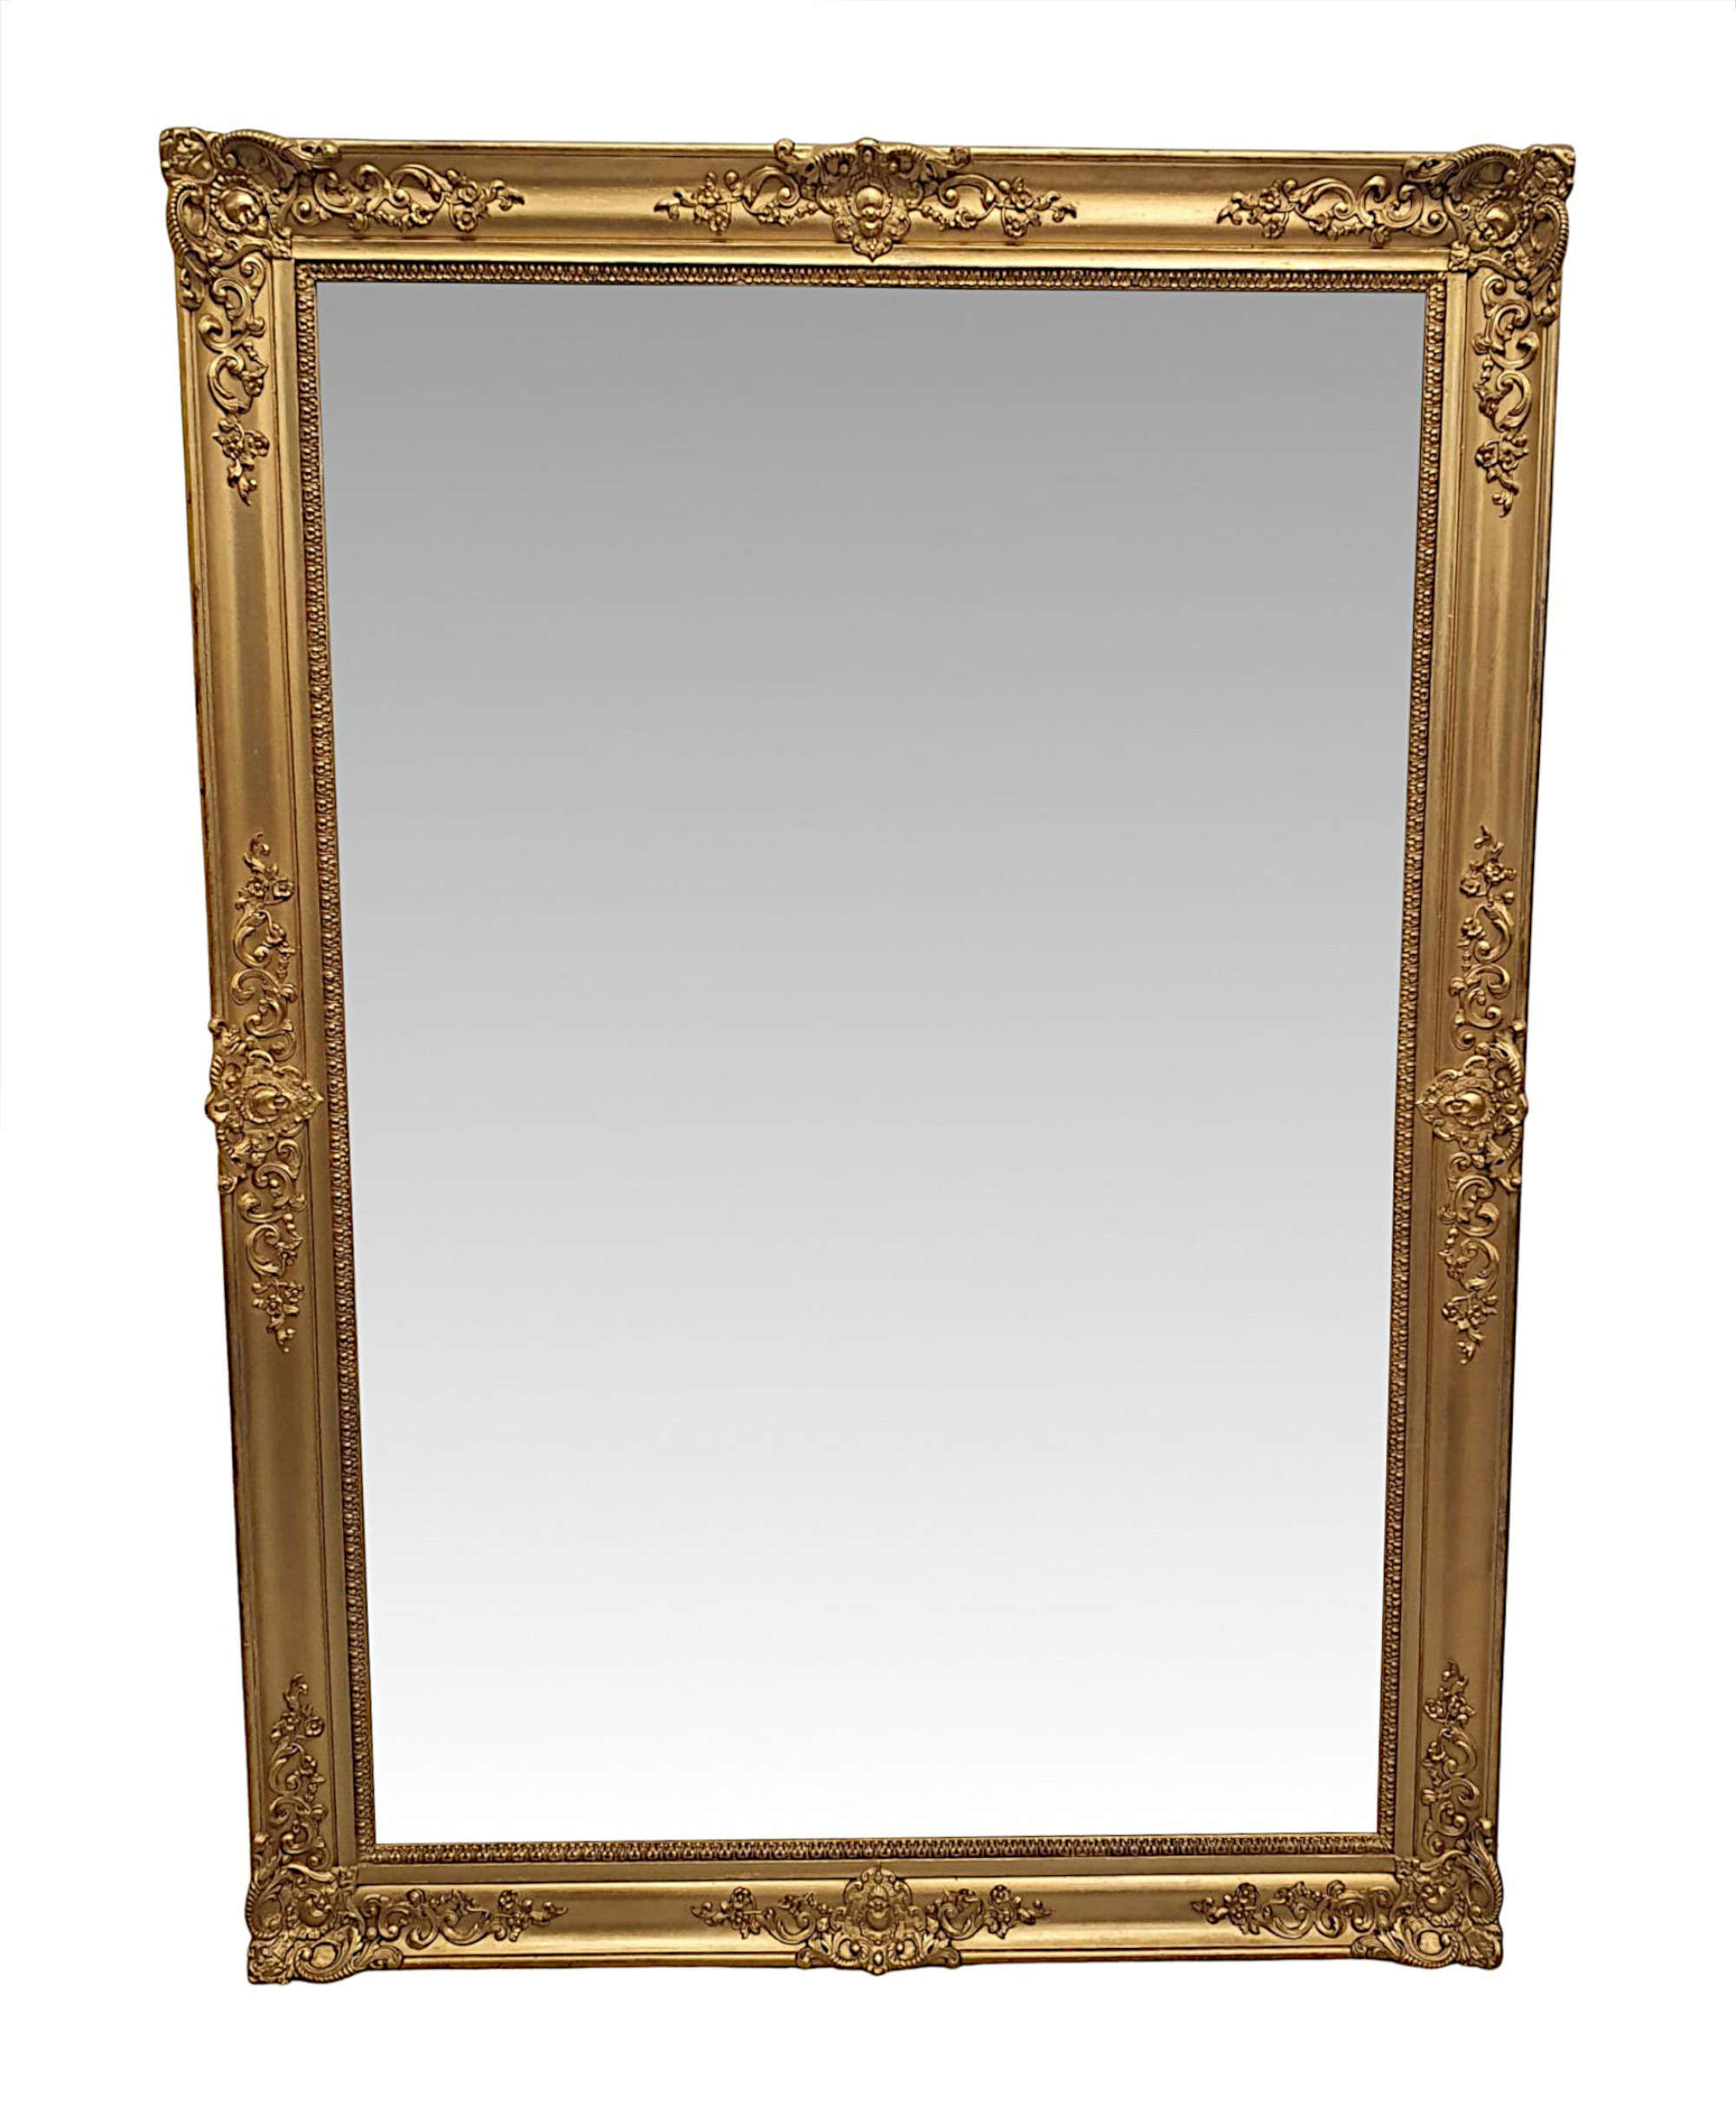 A Gorgeous 19th Century Giltwood Antique Overmantle Mirror